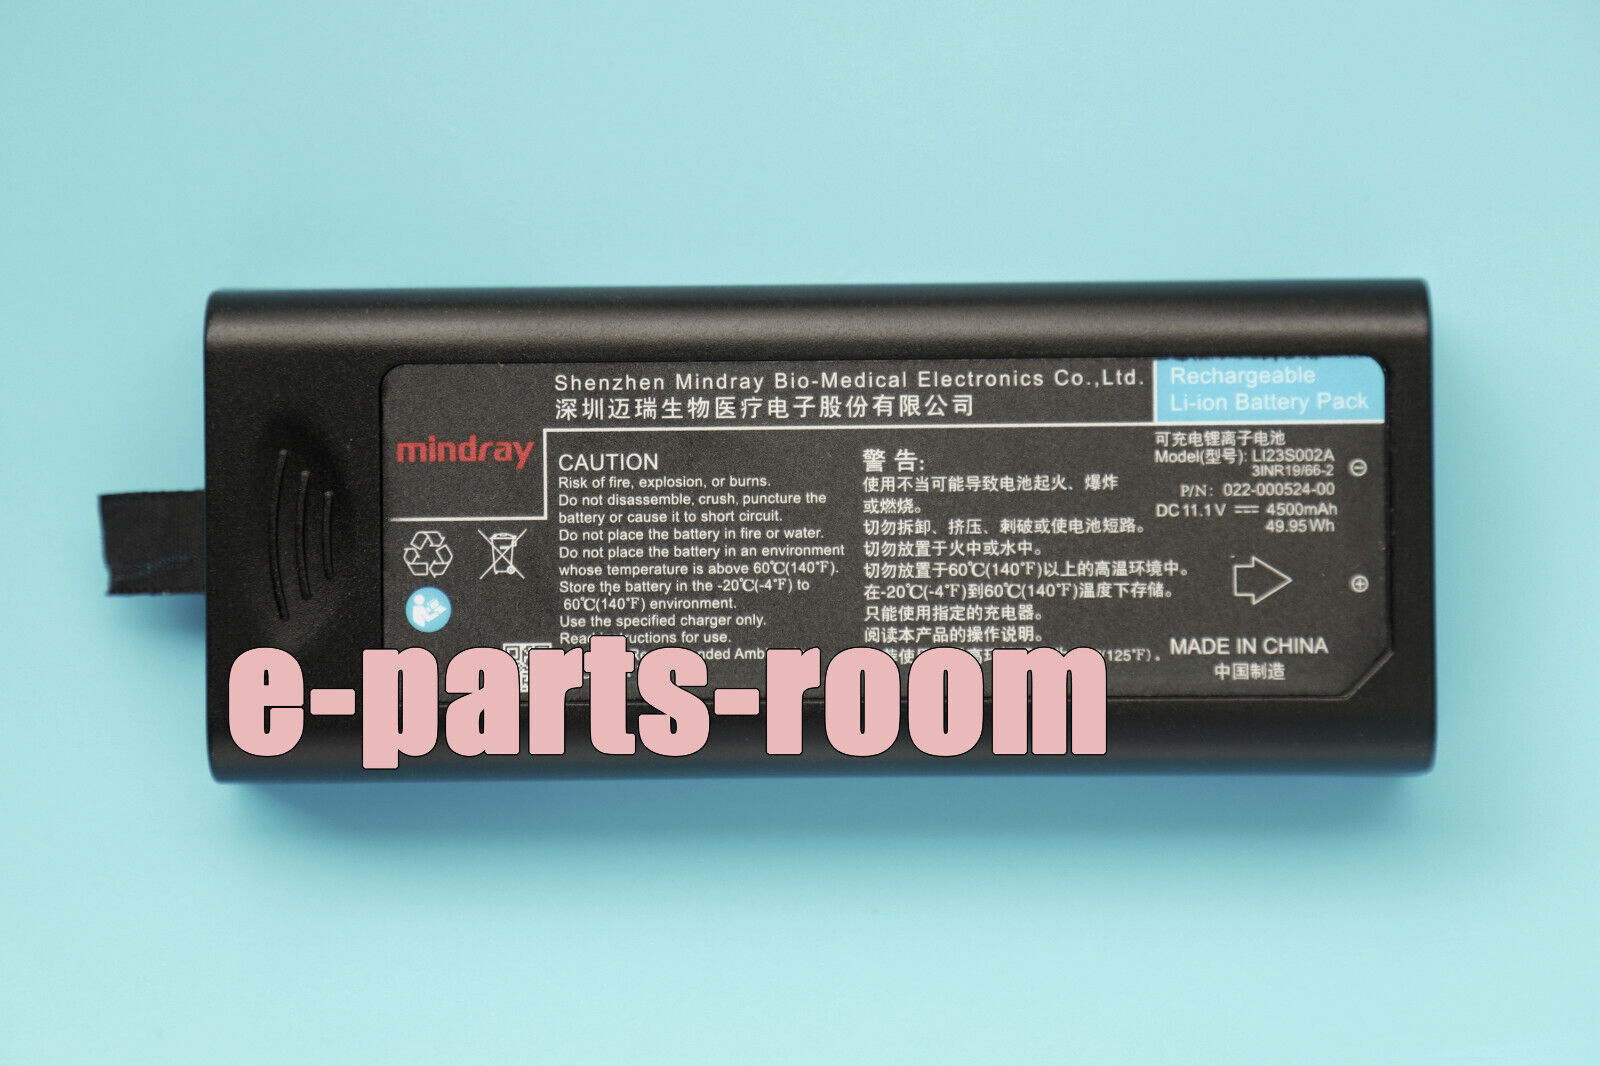 Genuine LI23S002A 022-000008-00 Battery for Mindray T5 T6 T8 BeneView T5 T6 T8 Brand Mindray Type Rechargeable Battery